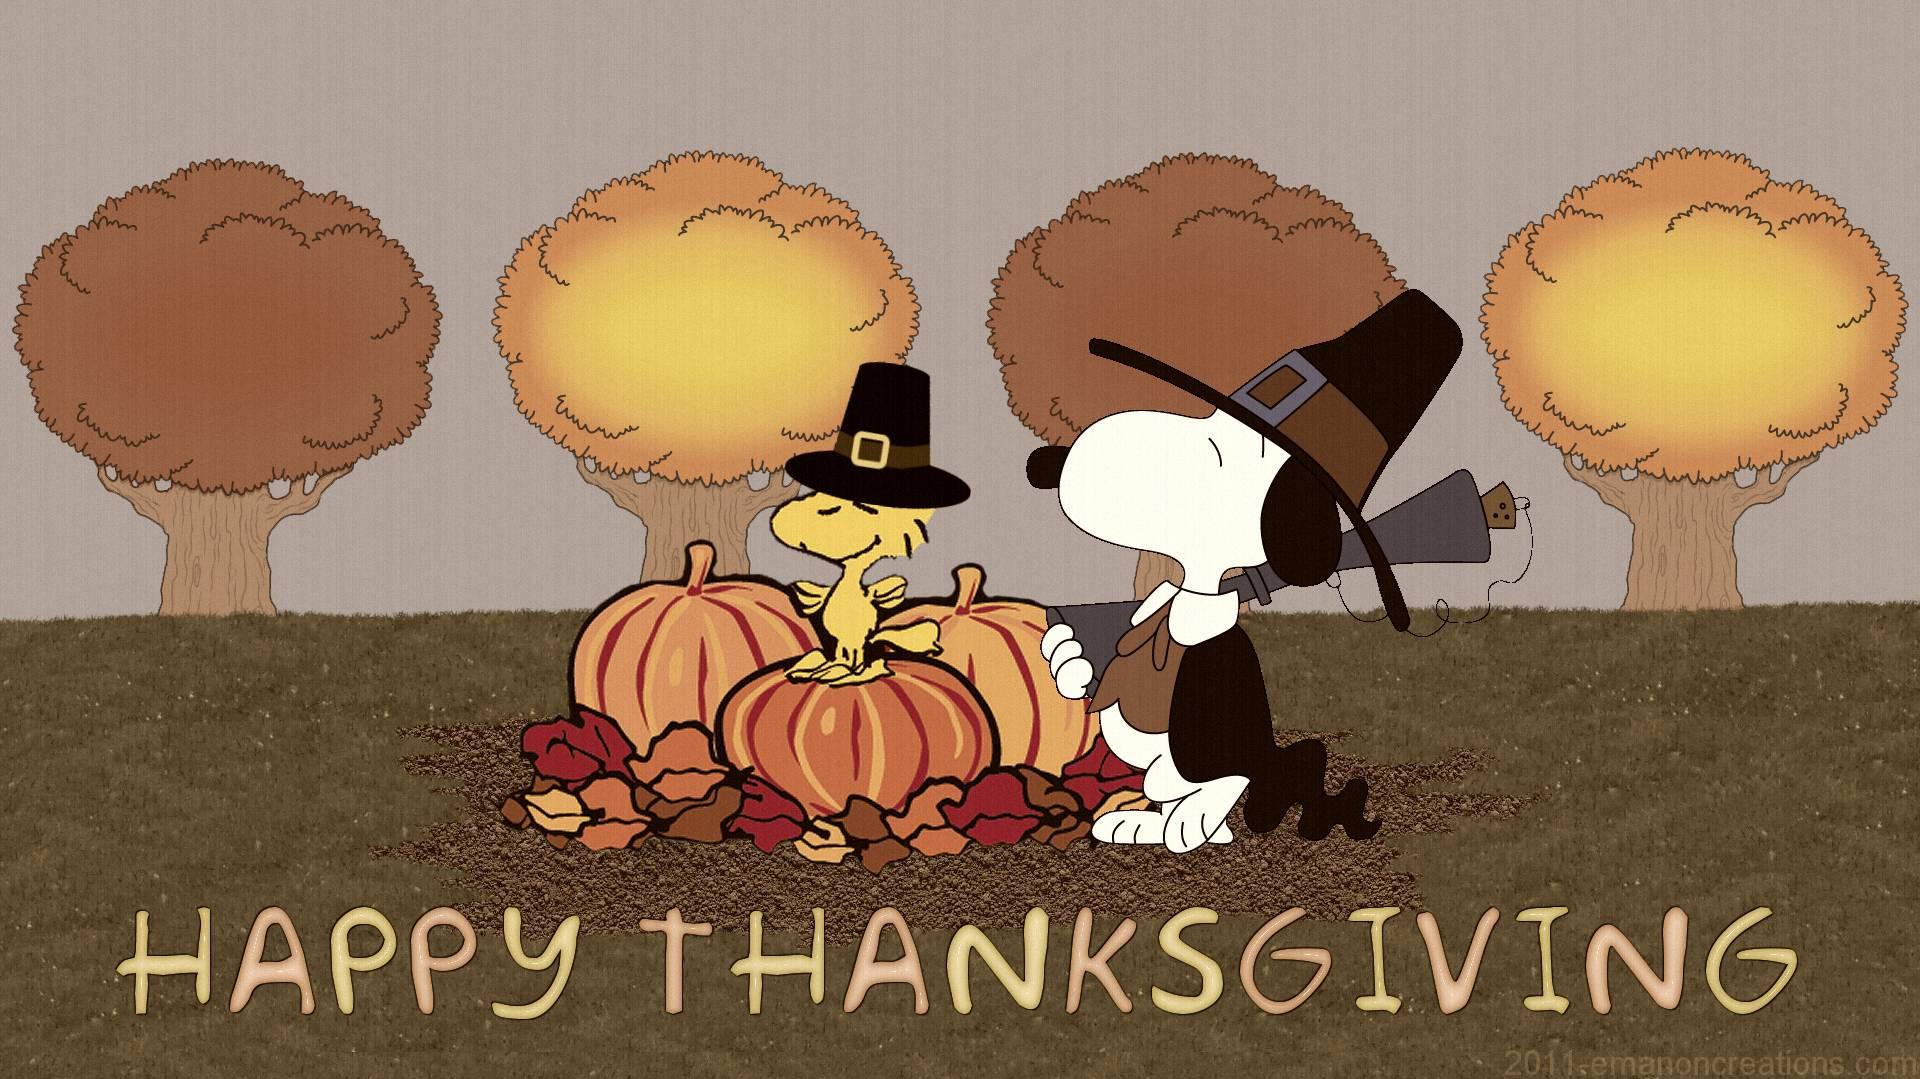 Download Thanksgiving Woodstock And Snoopy Wallpaper